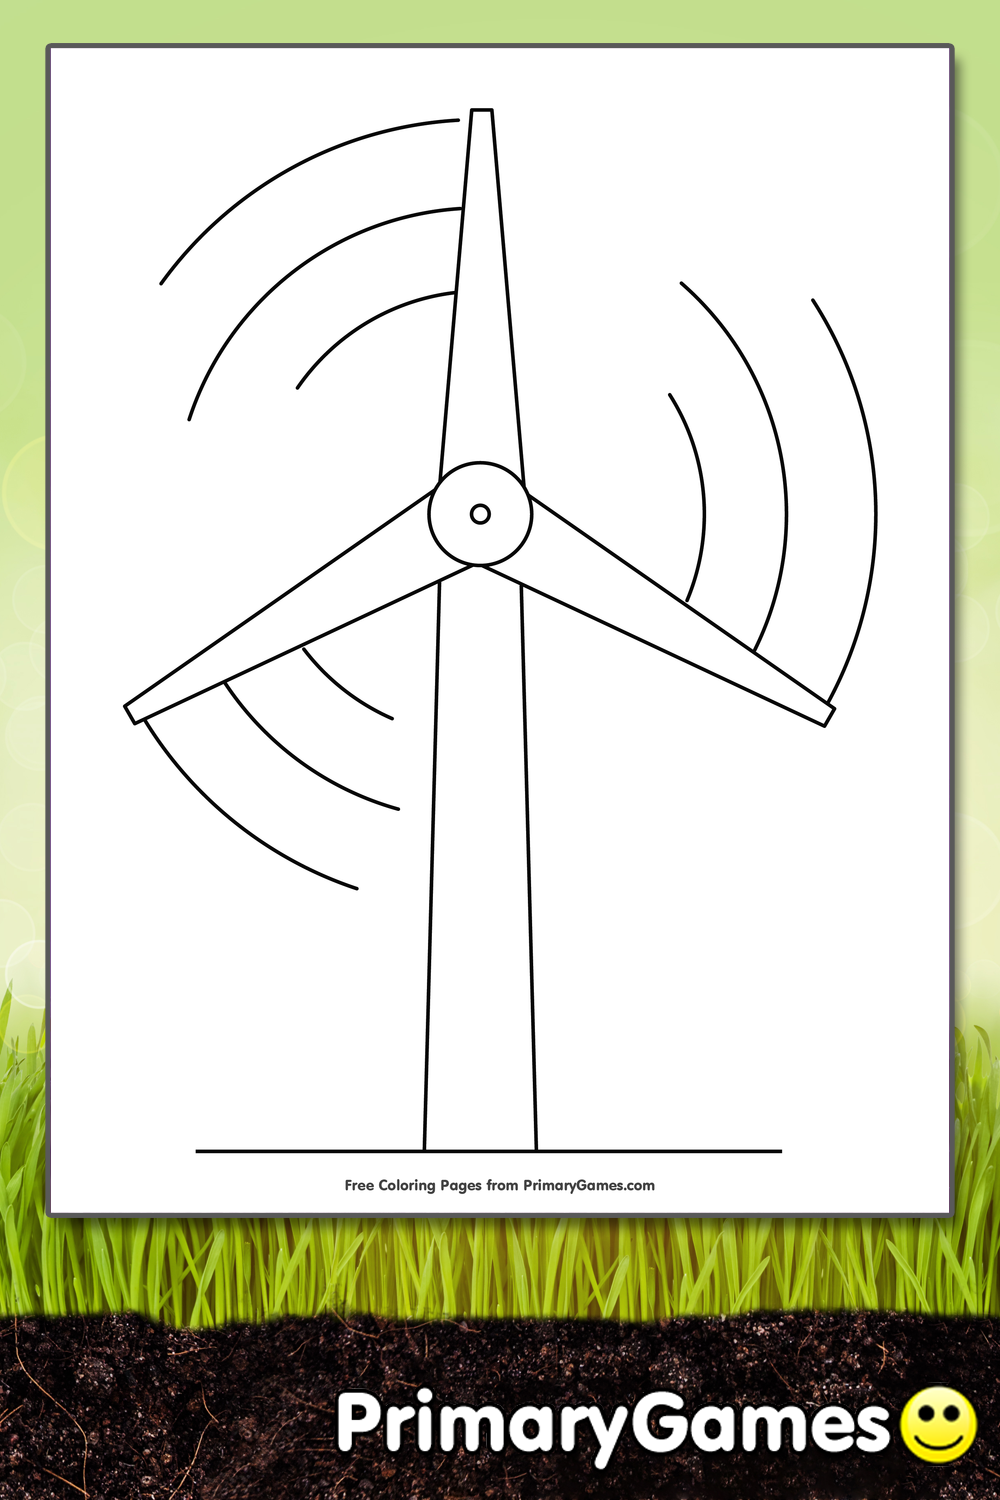 Wind Energy Turbine Coloring Page | Printable Earth Day Coloring eBook